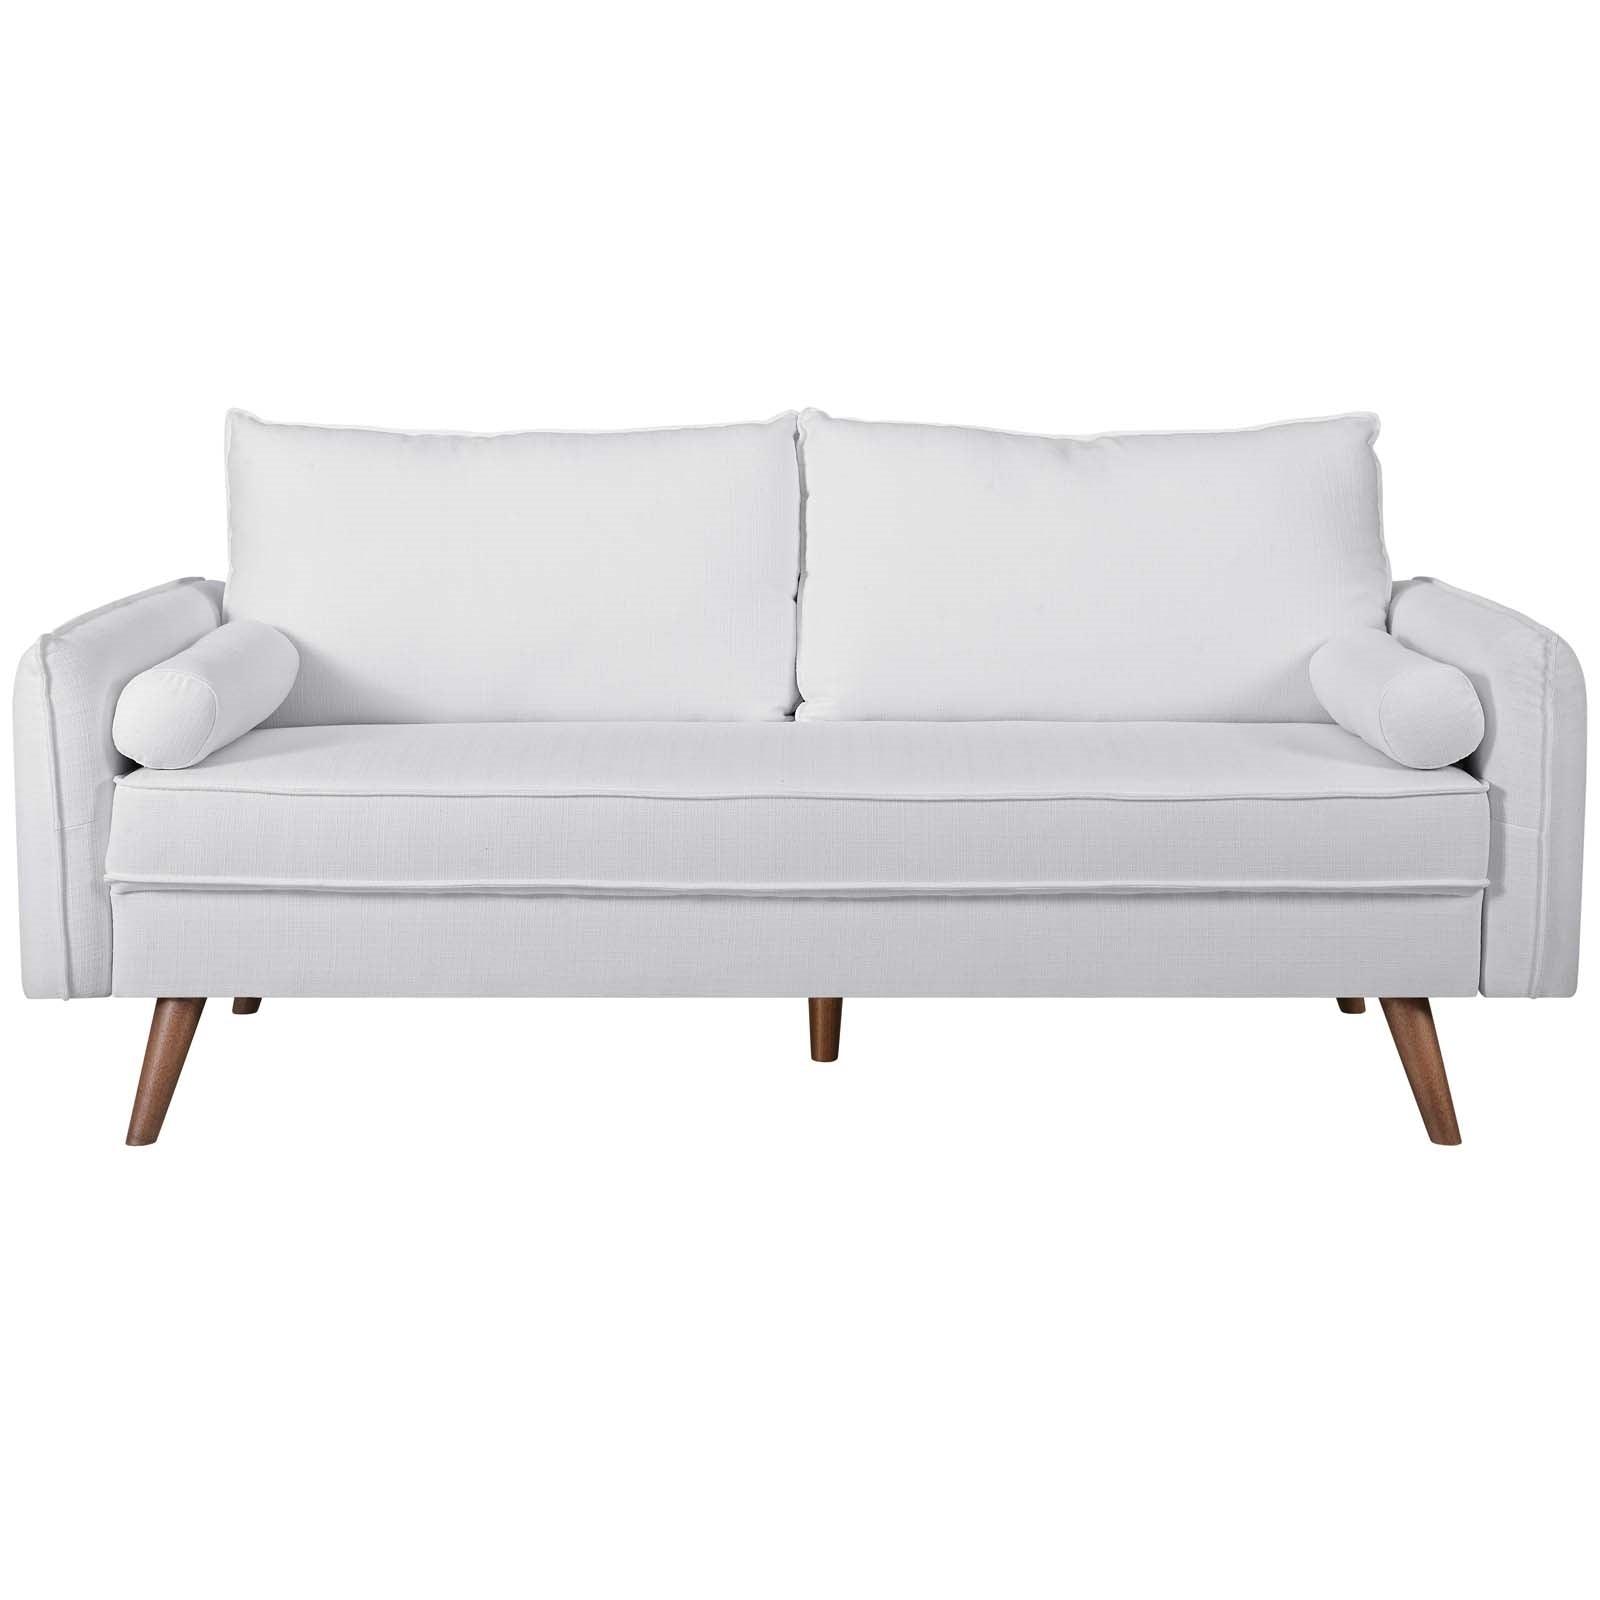 Revine Upholstered Fabric Sofa in White - Euro Living Furniture